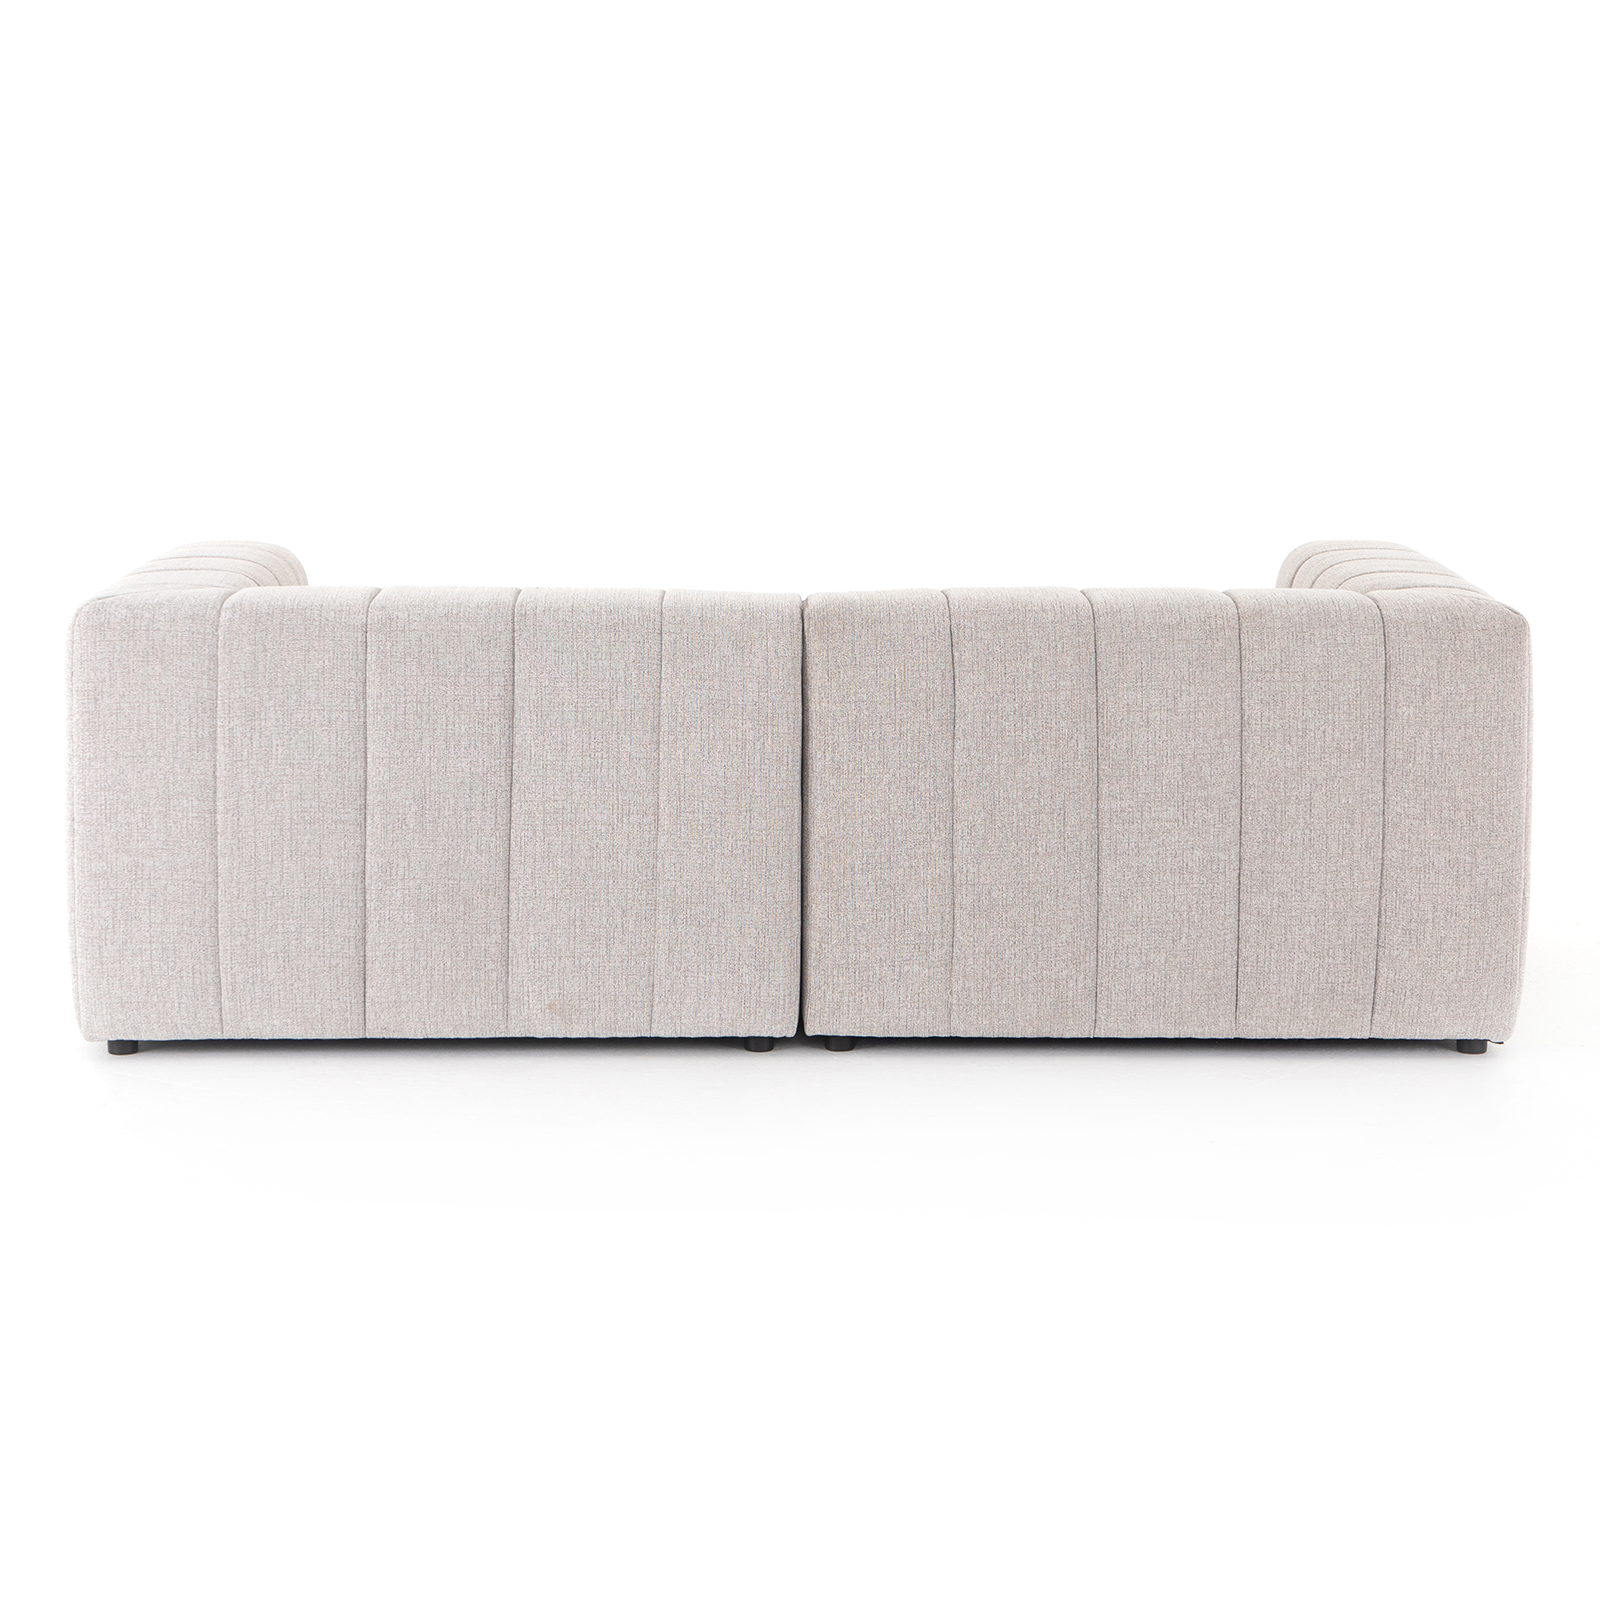 Darley Sectional